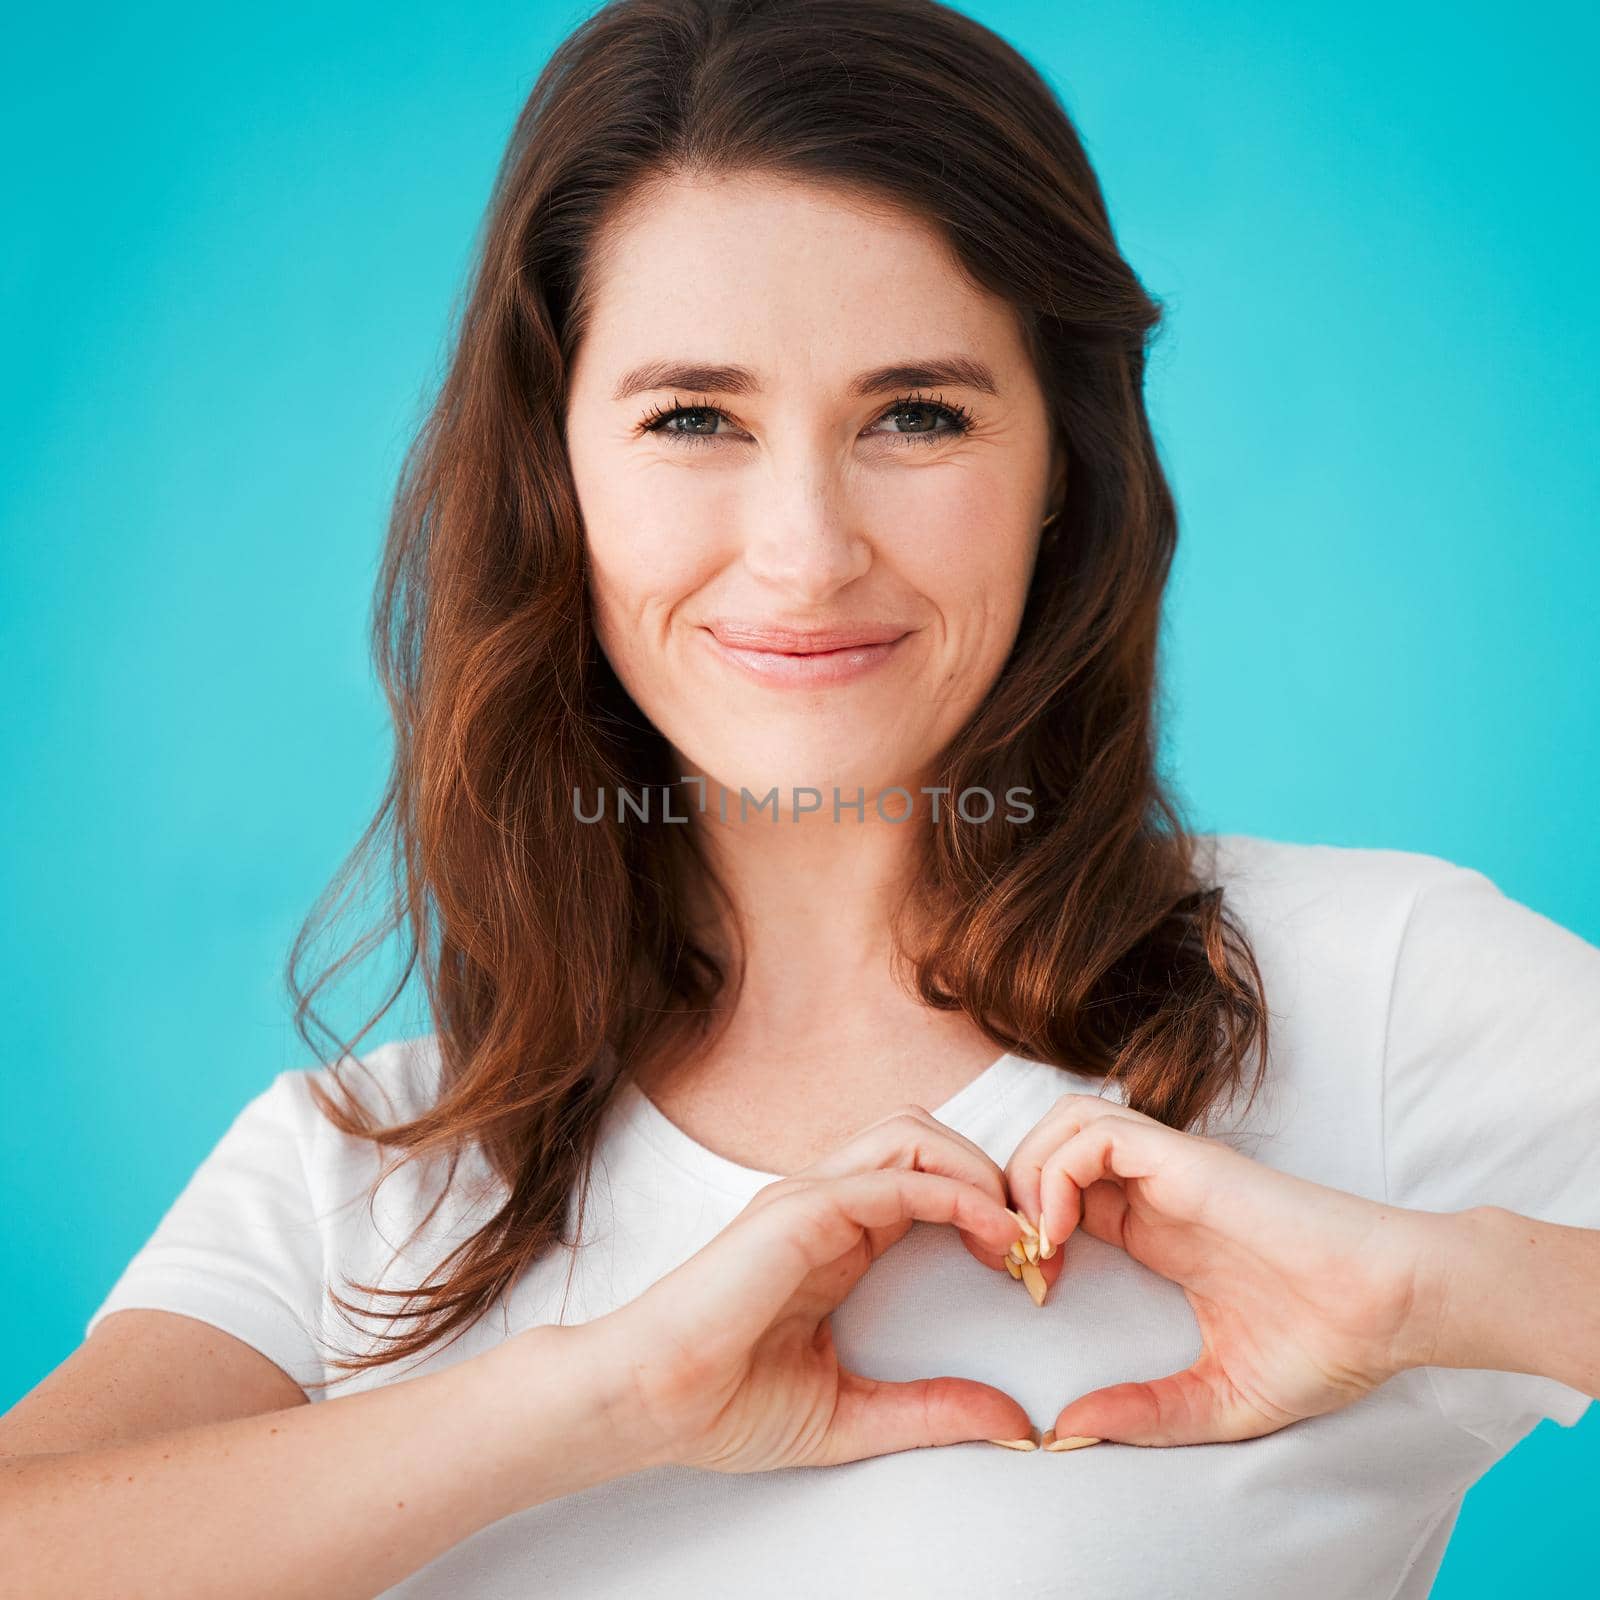 Its about love. Studio portrait of an attractive young woman making a heart shape over her chest against a blue background. by YuriArcurs